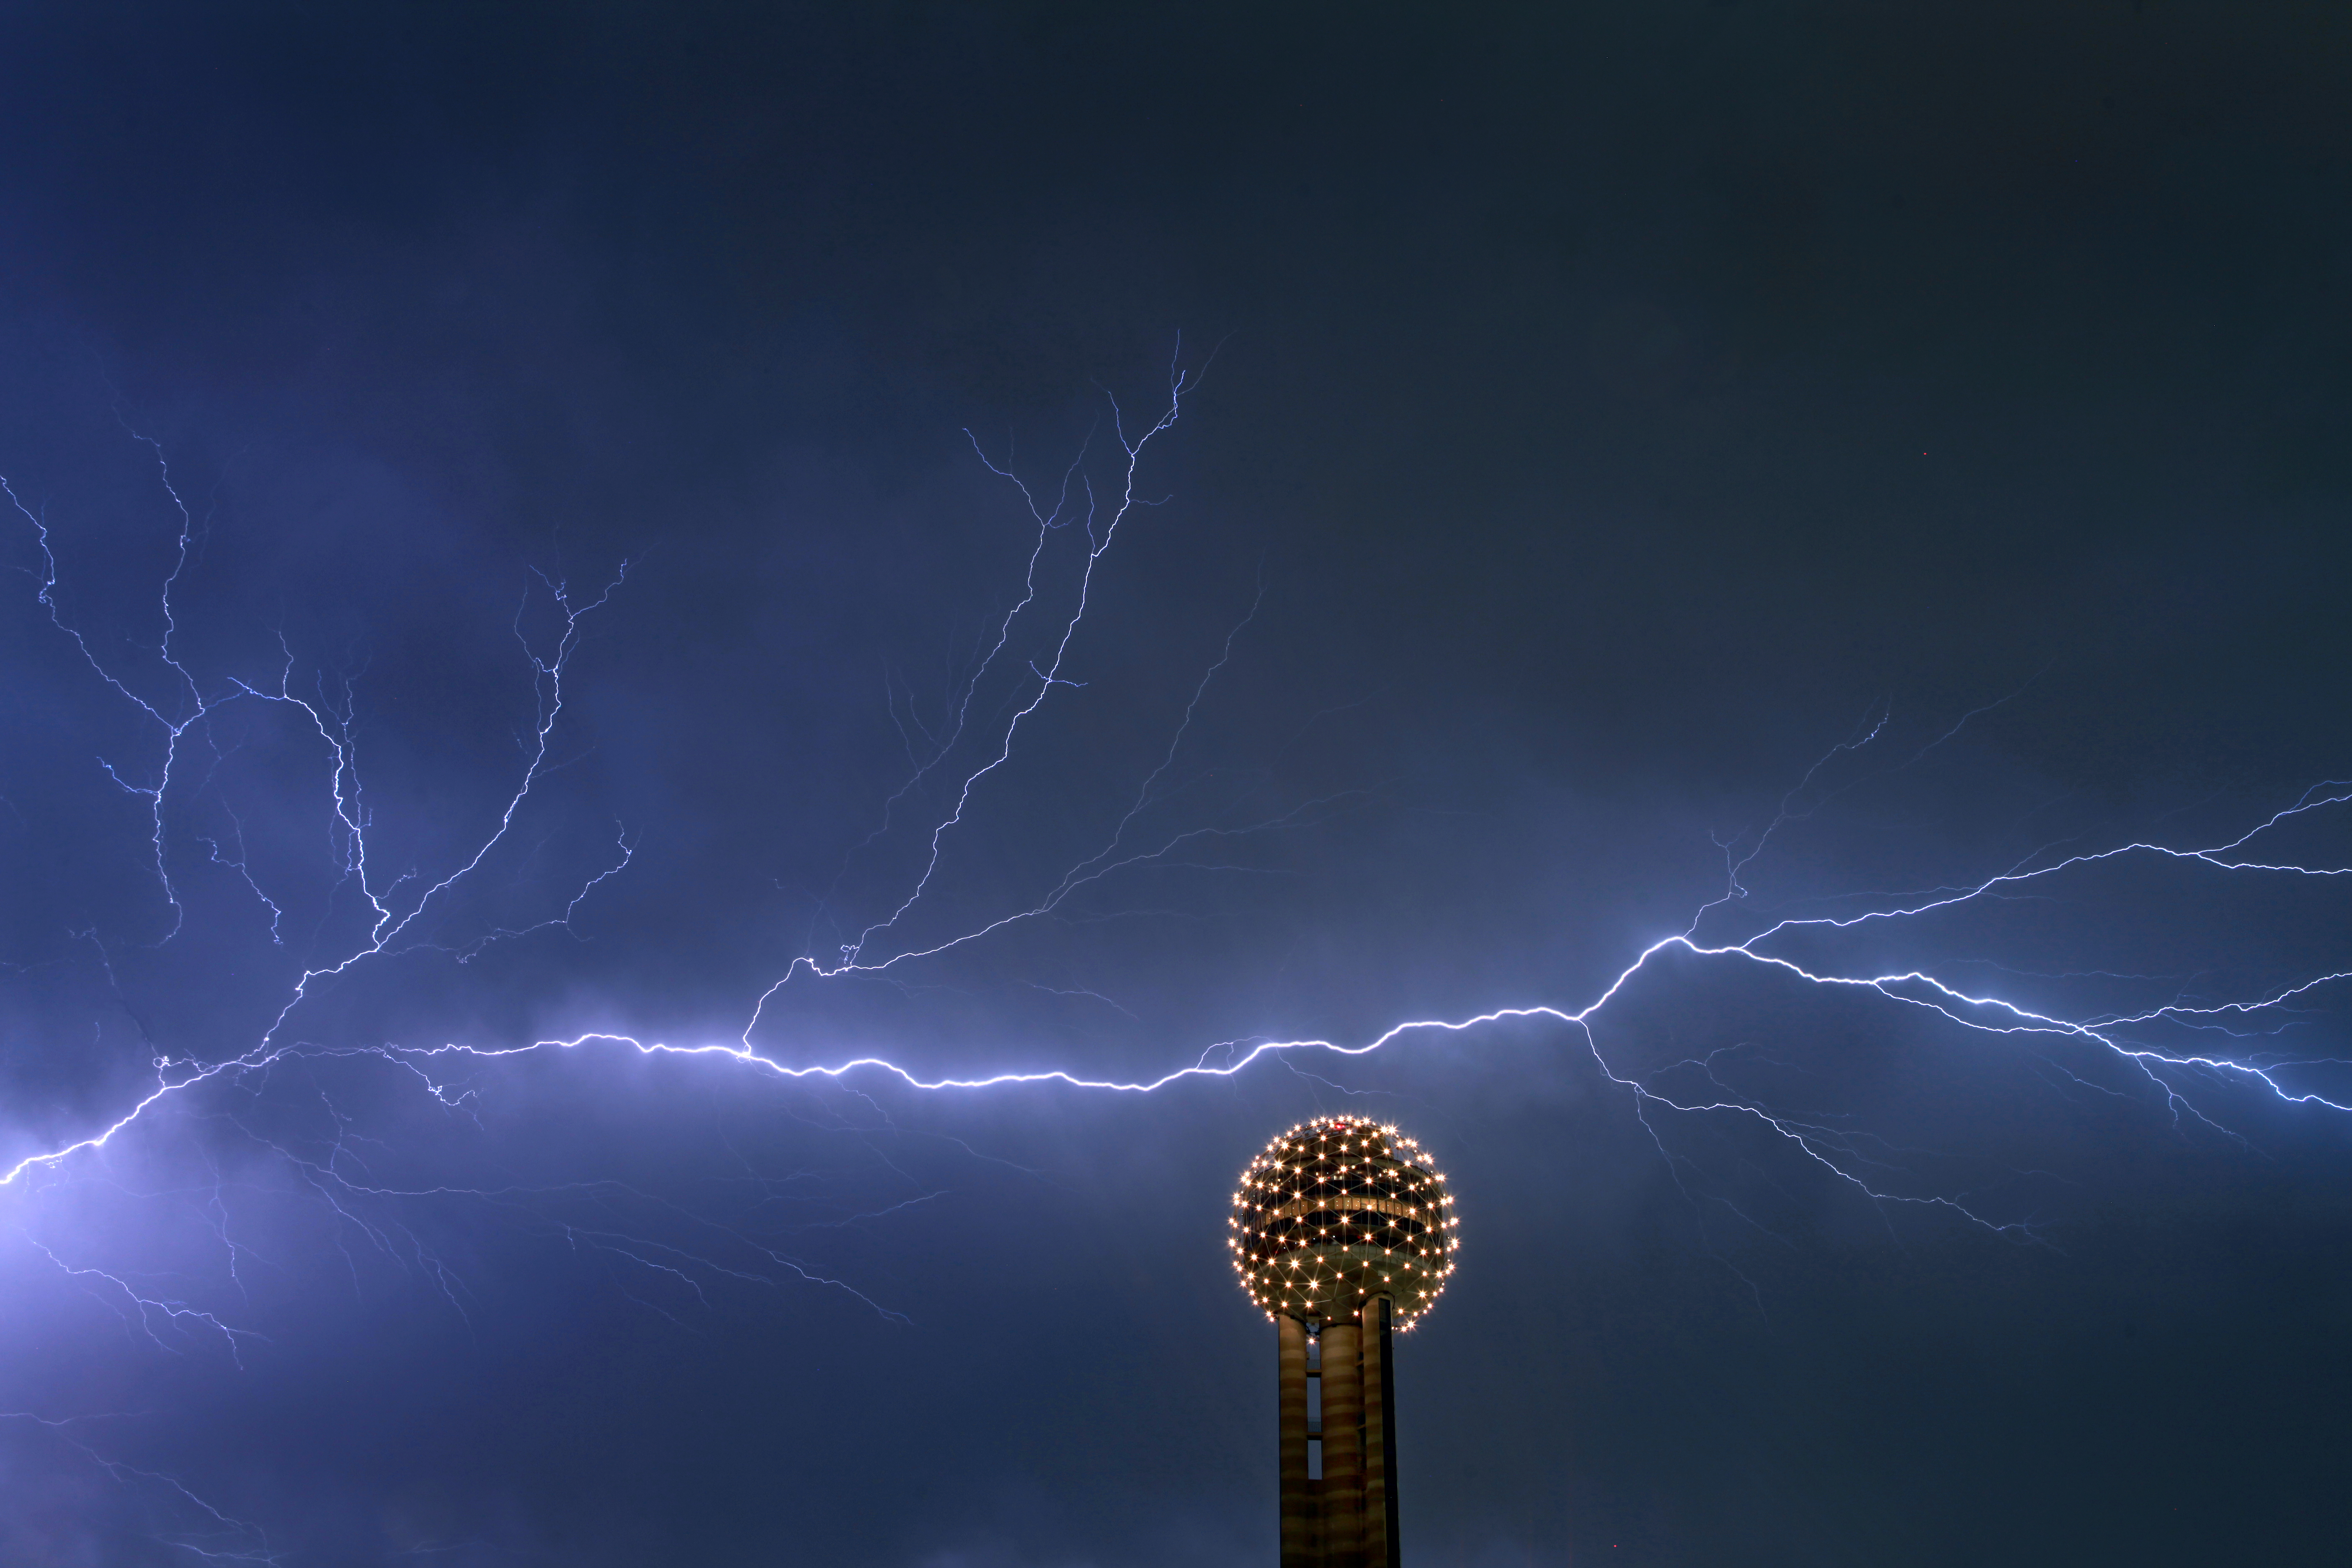 Texas recorded more lightning strikes in 2019 than any other state